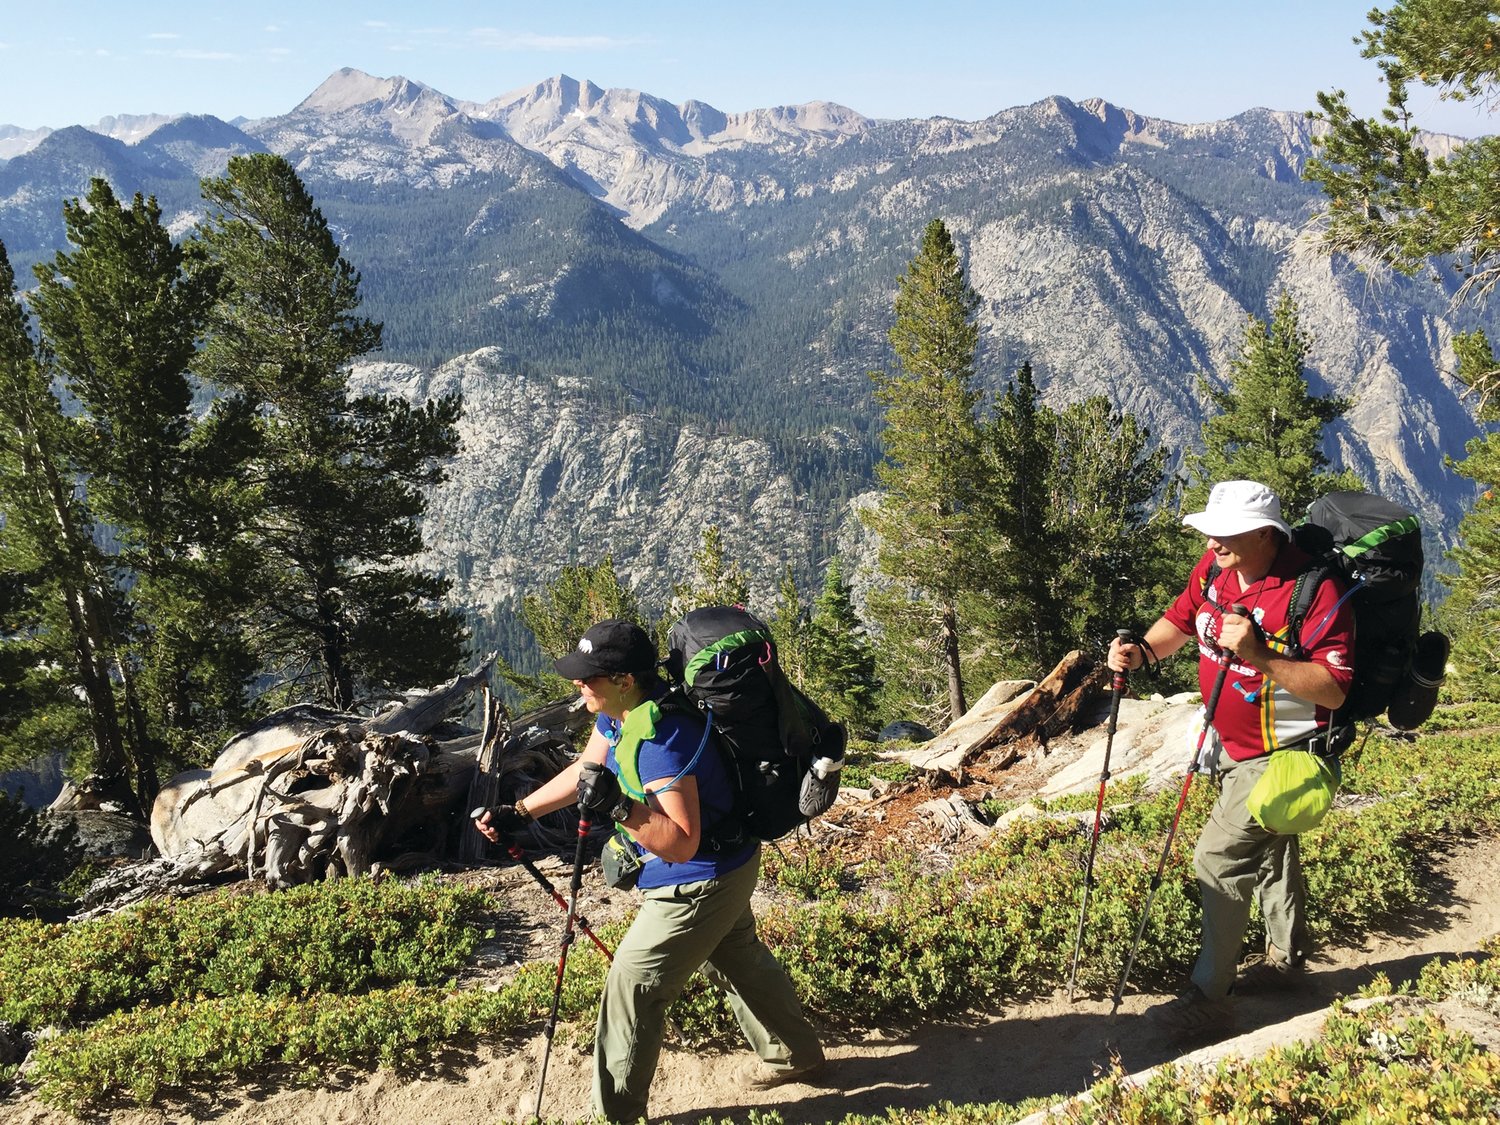 Sue Black Thickett, left, and her husband, John, hike on the John Muir Trail in California. Sue, who lives in Texas, recently completed the Junior Ranger booklets from NICHES Land Trust.